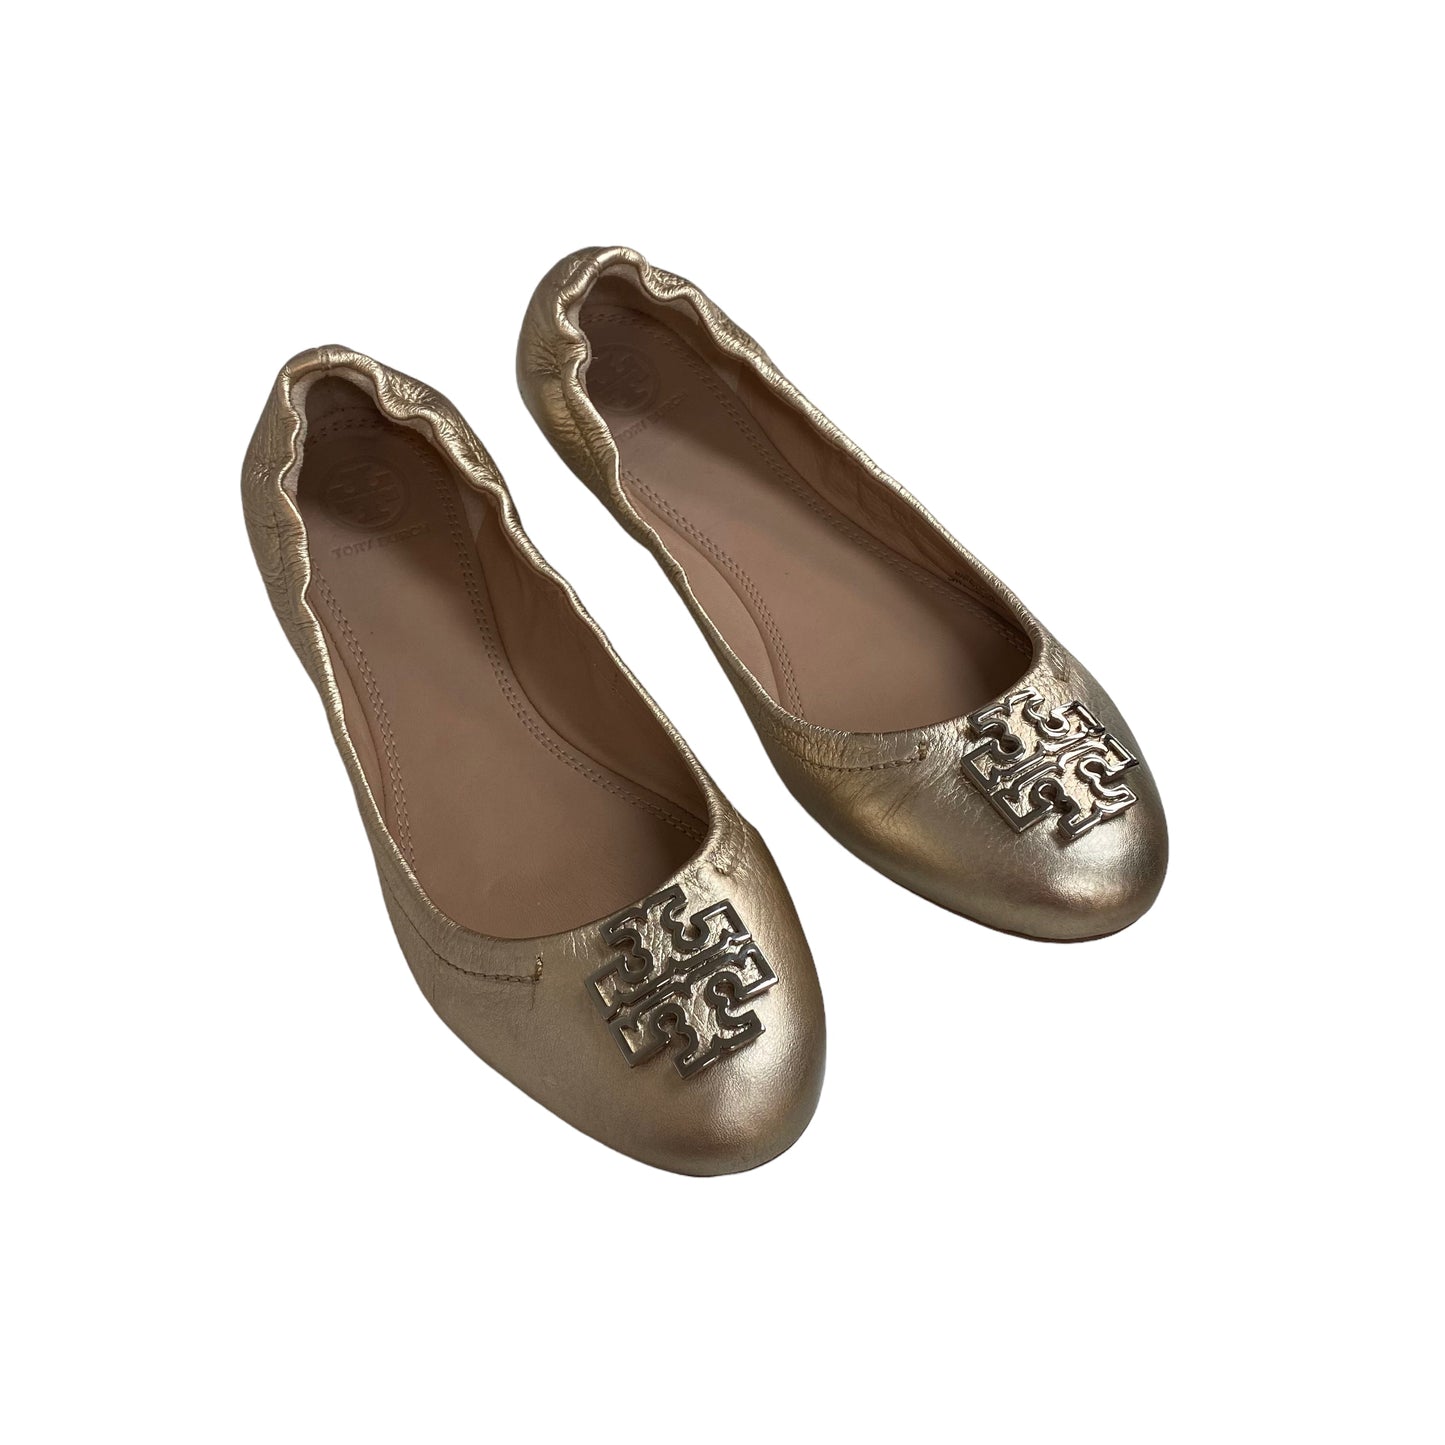 Gold Shoes Designer Tory Burch, Size 8